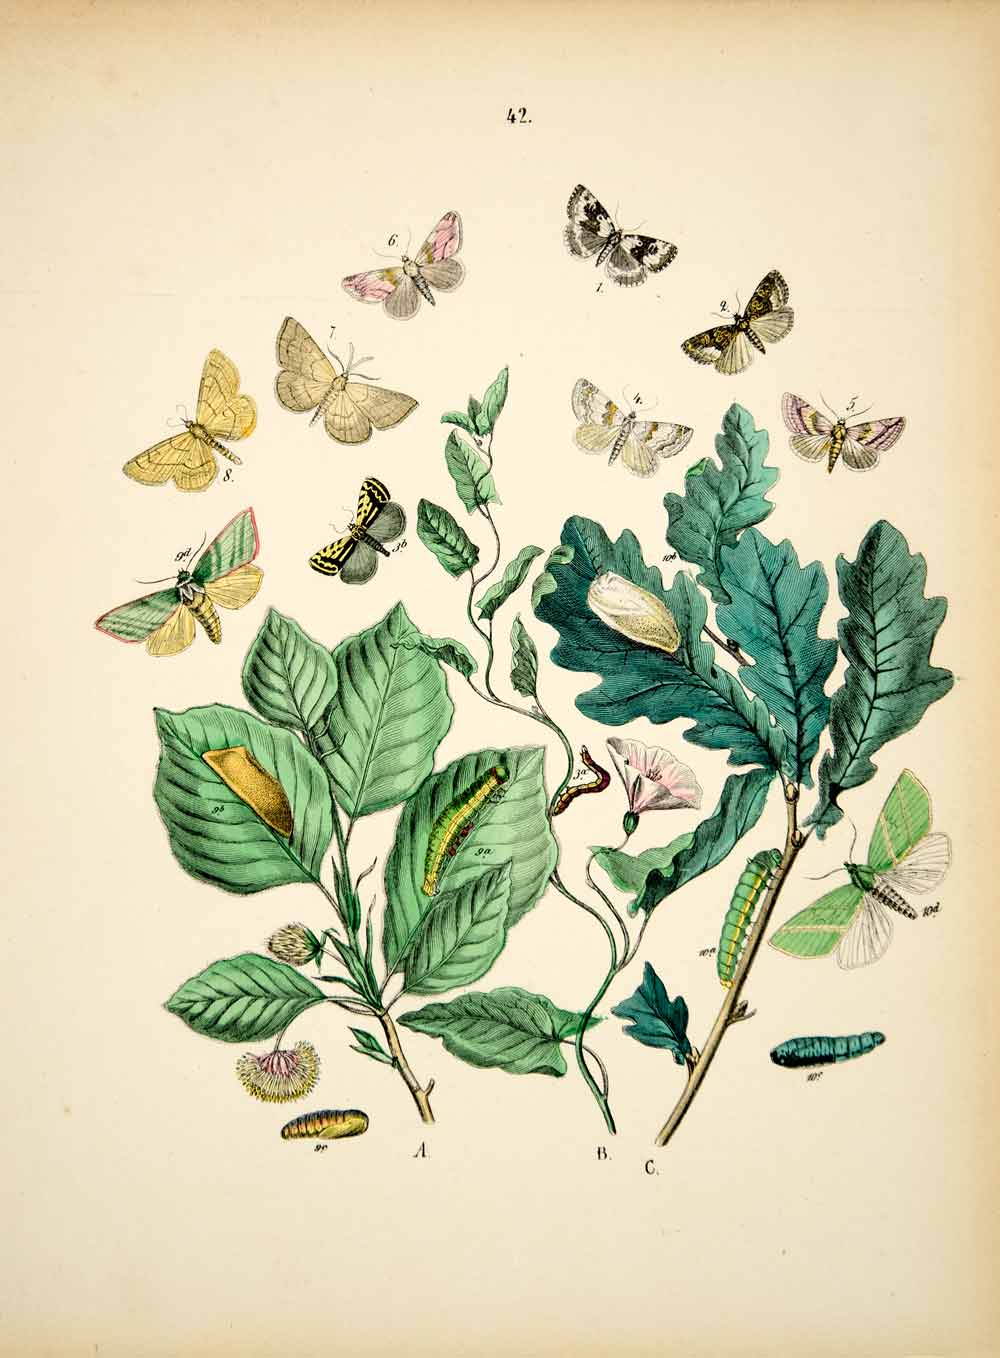 1882 Hand-Colored Lithograph WF Kirby Art Spotted Sulphur Moth Insect Bugs EBM1